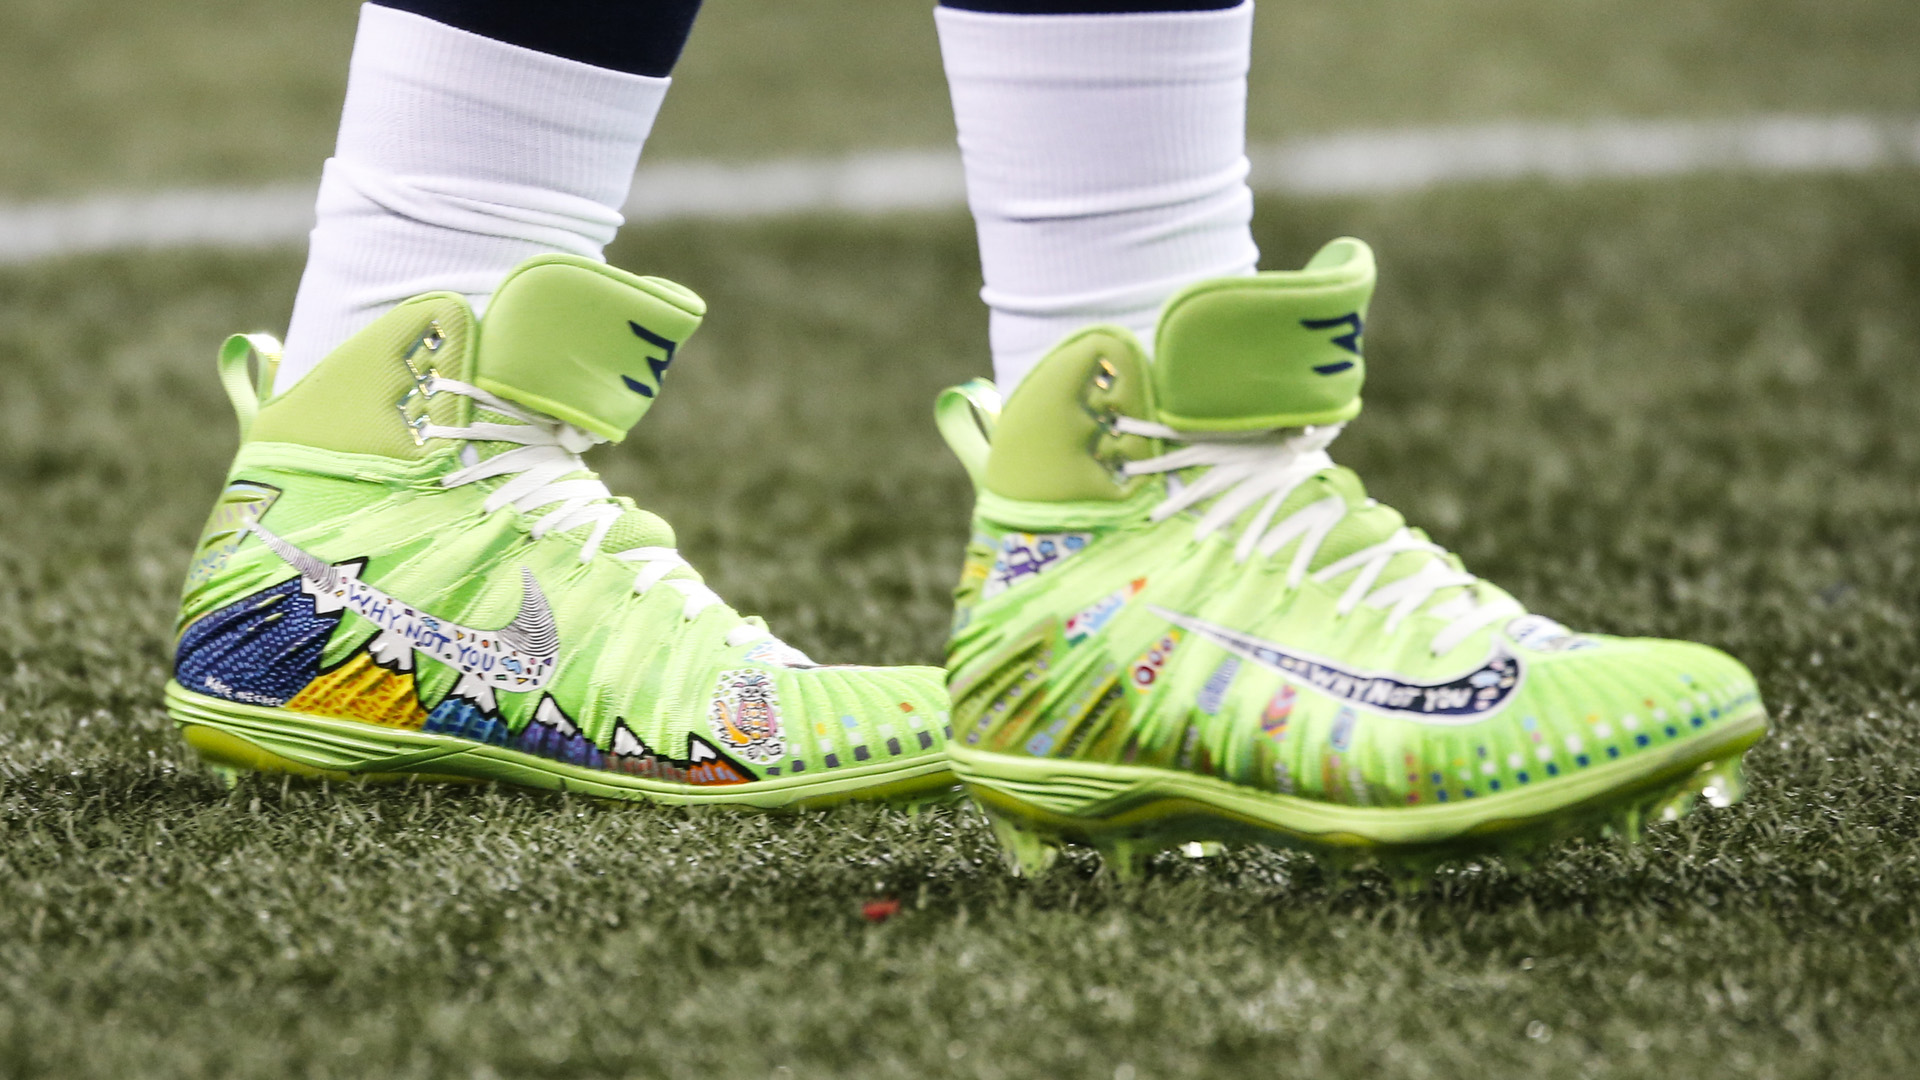 russell wilson cleats youth